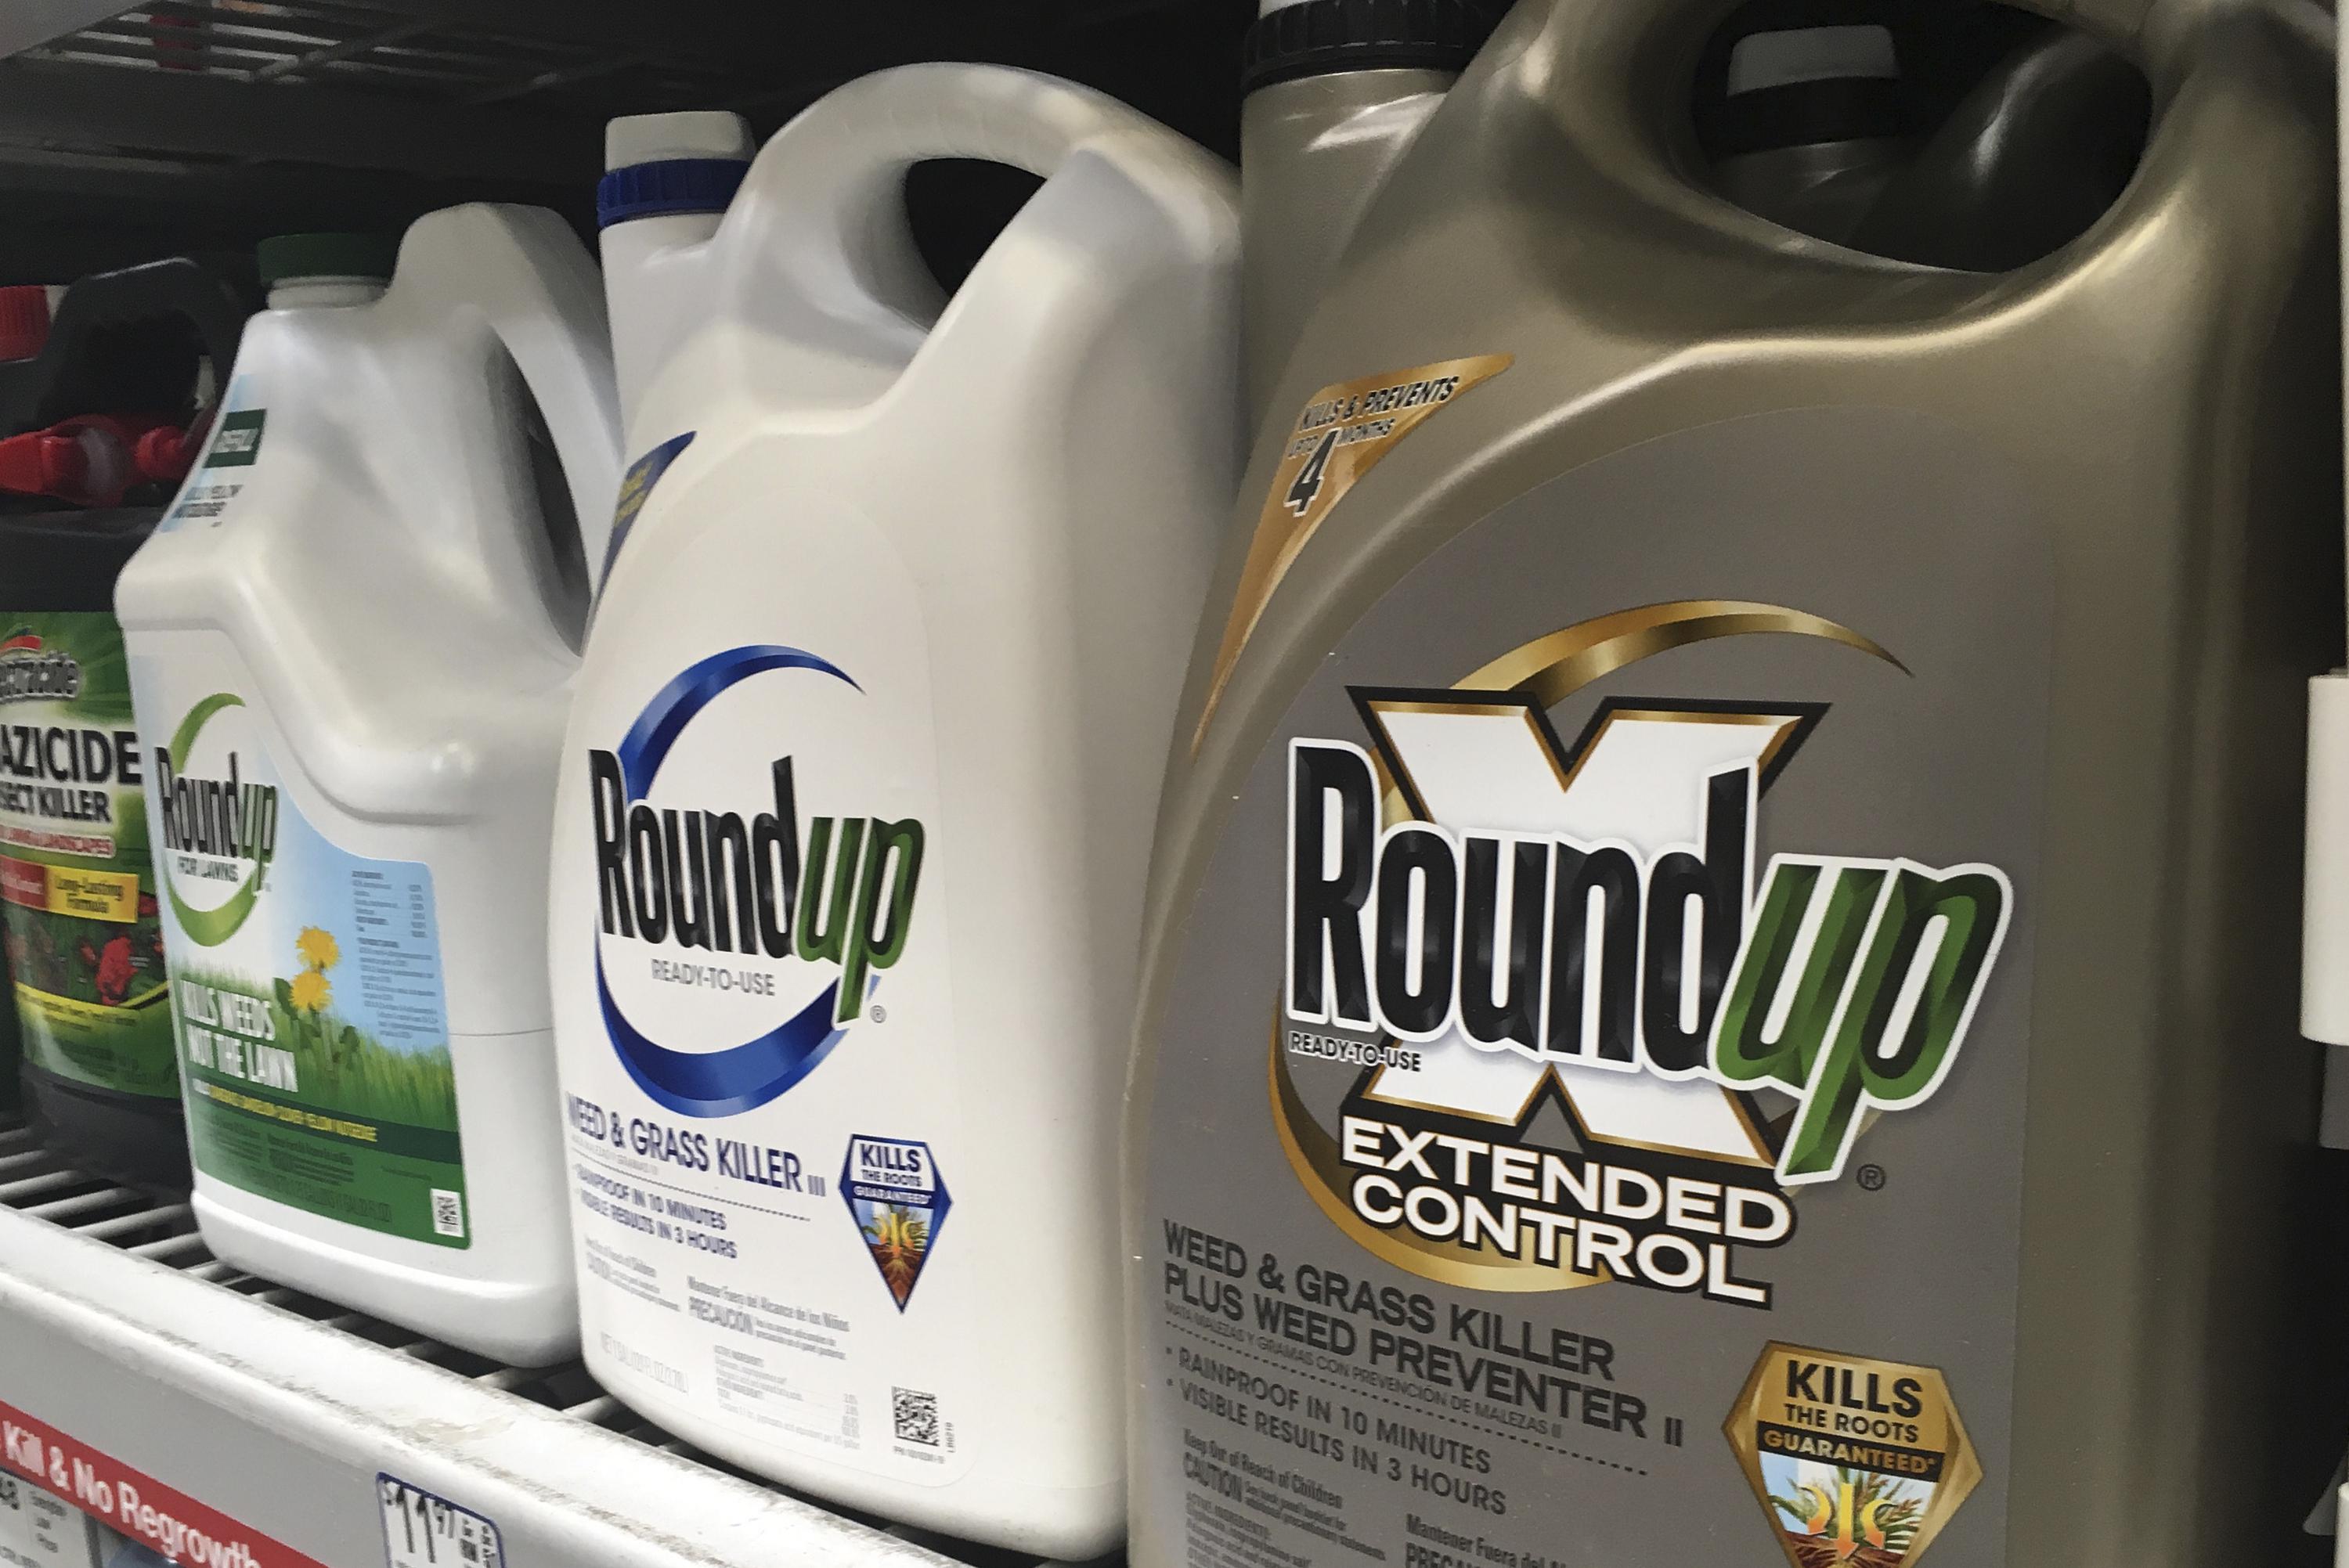 Cancer Caused by Roundup and Glyphosate Weed-Killers